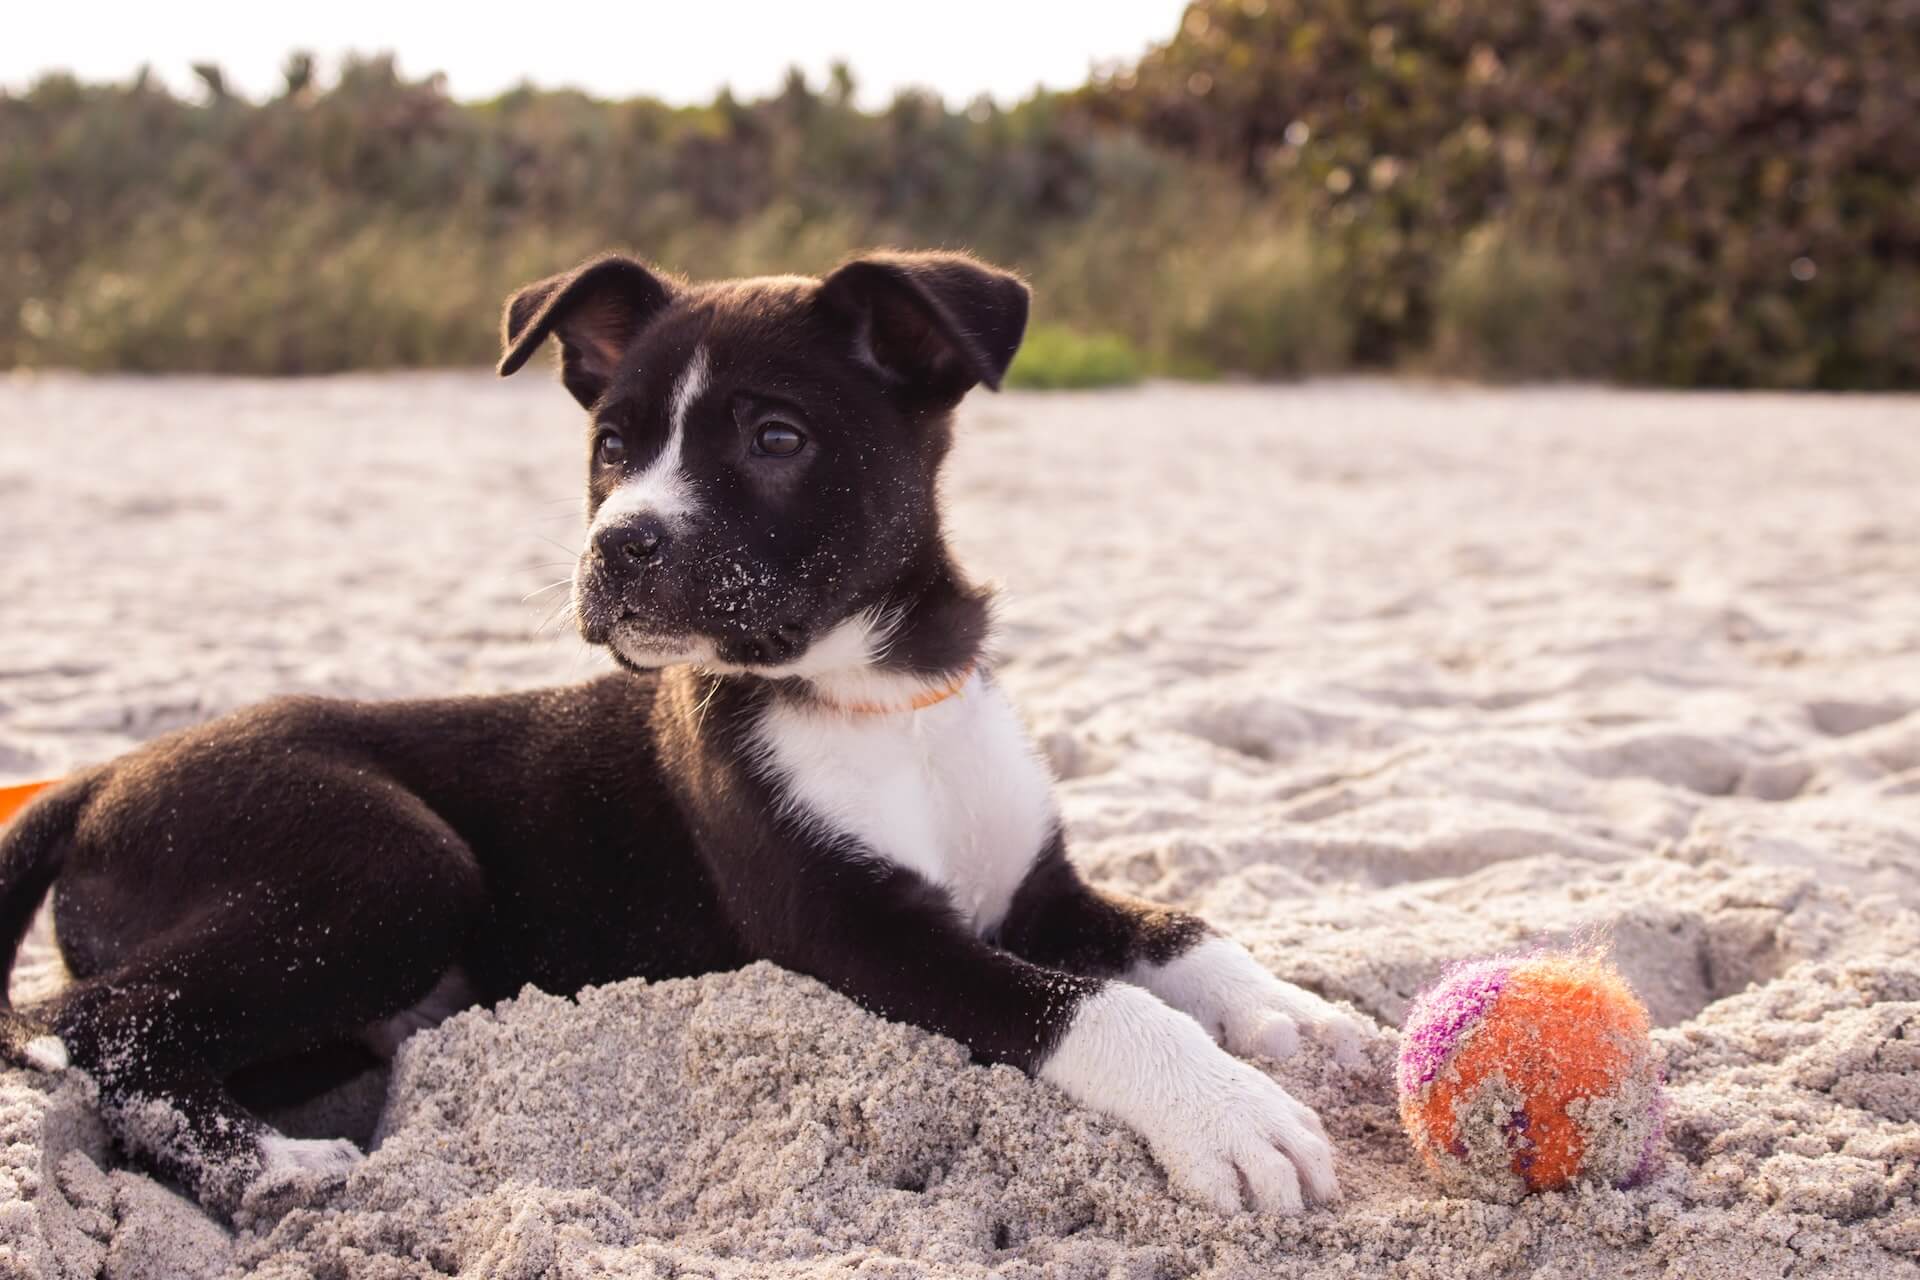 Black & white puppy laying on beach with an orange ball between it's paws.